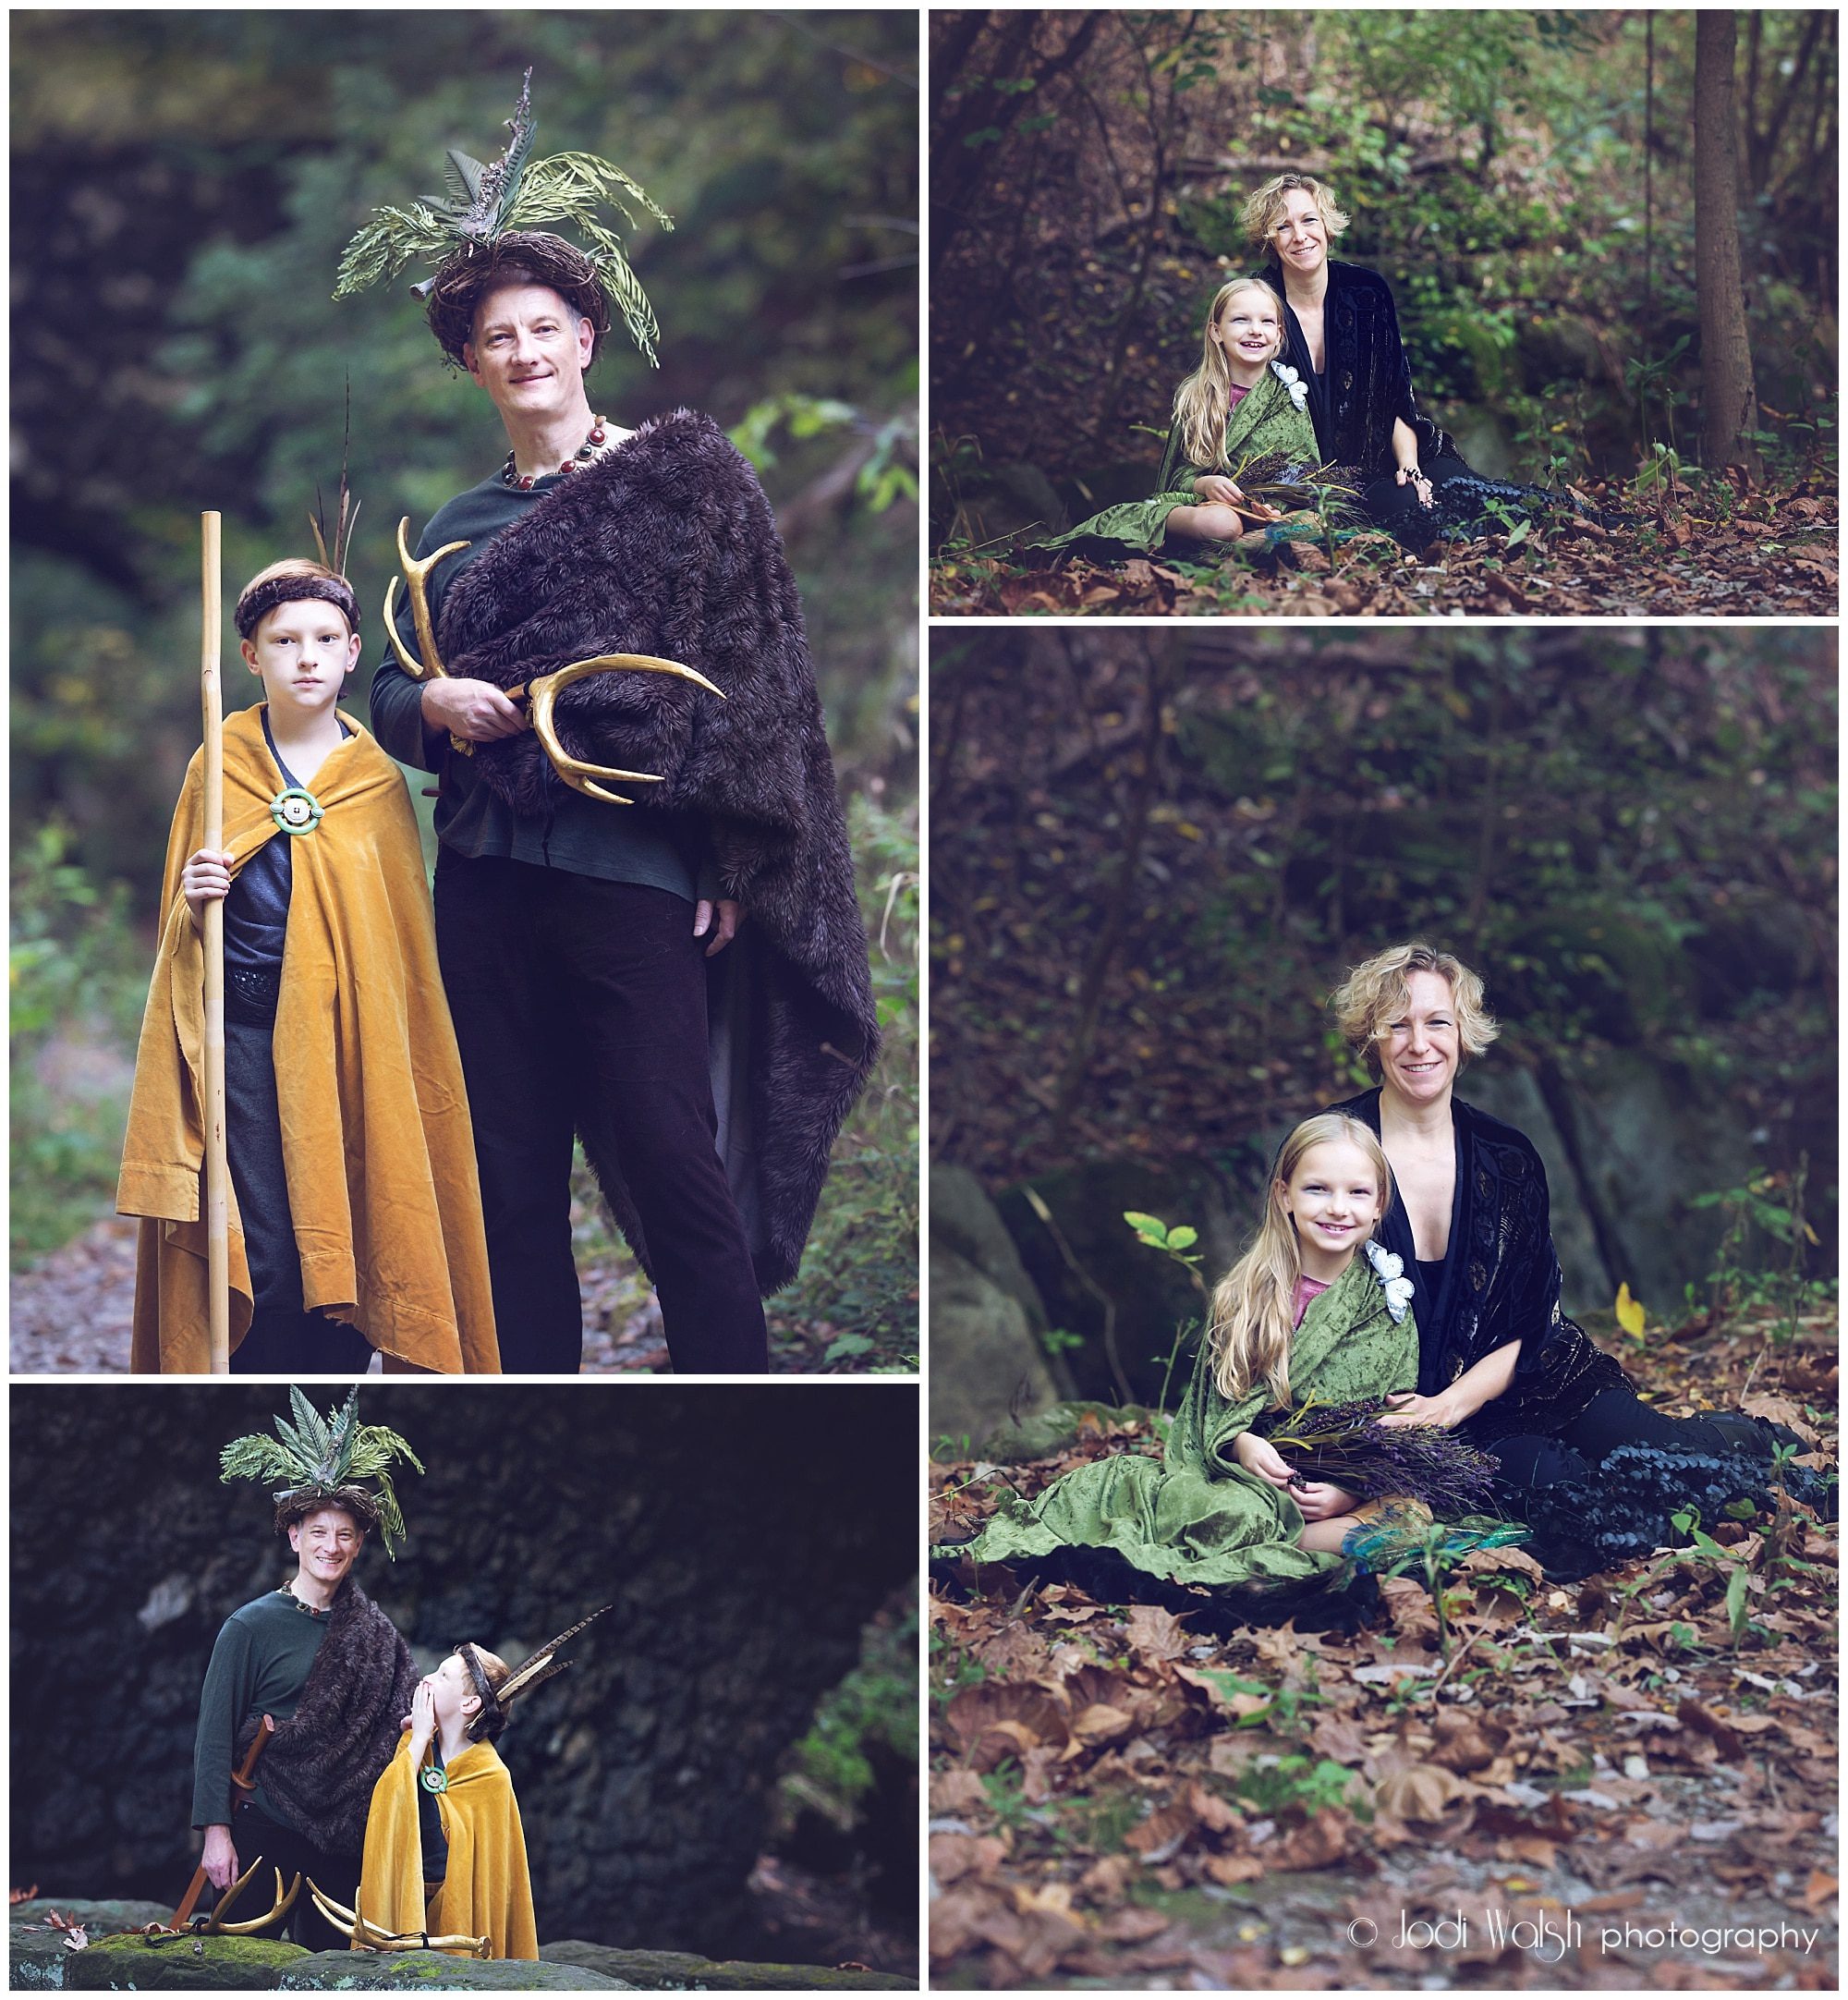 whimsical family portraits with costumes in the woods